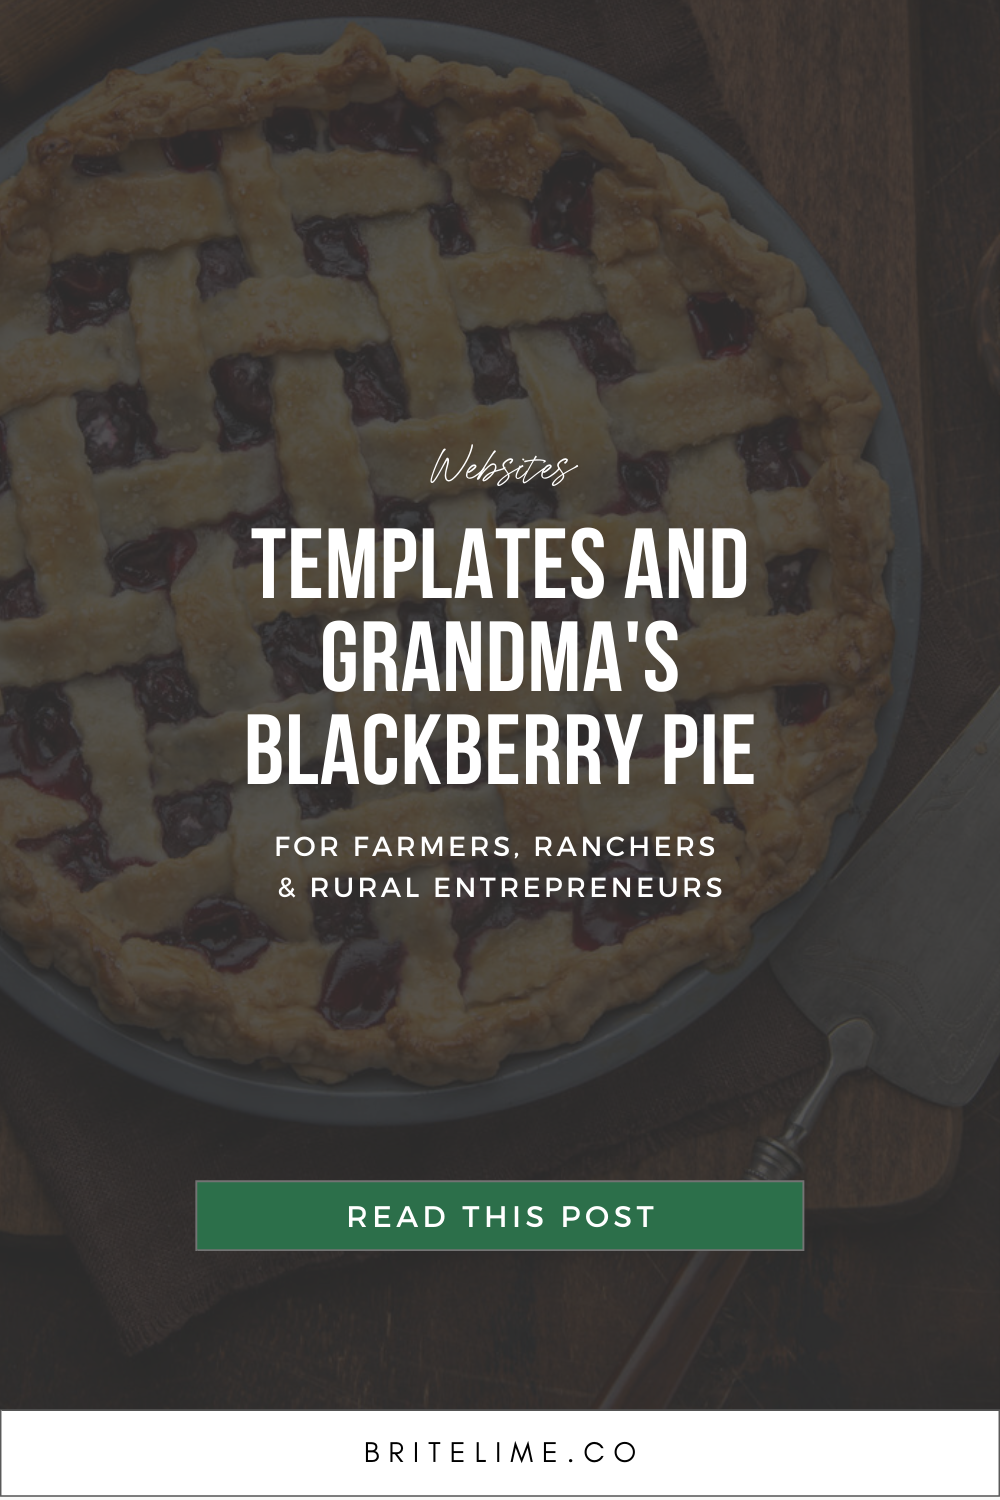 Graphic image: Text reads " Templates and Grandma's Blackberry Pie"